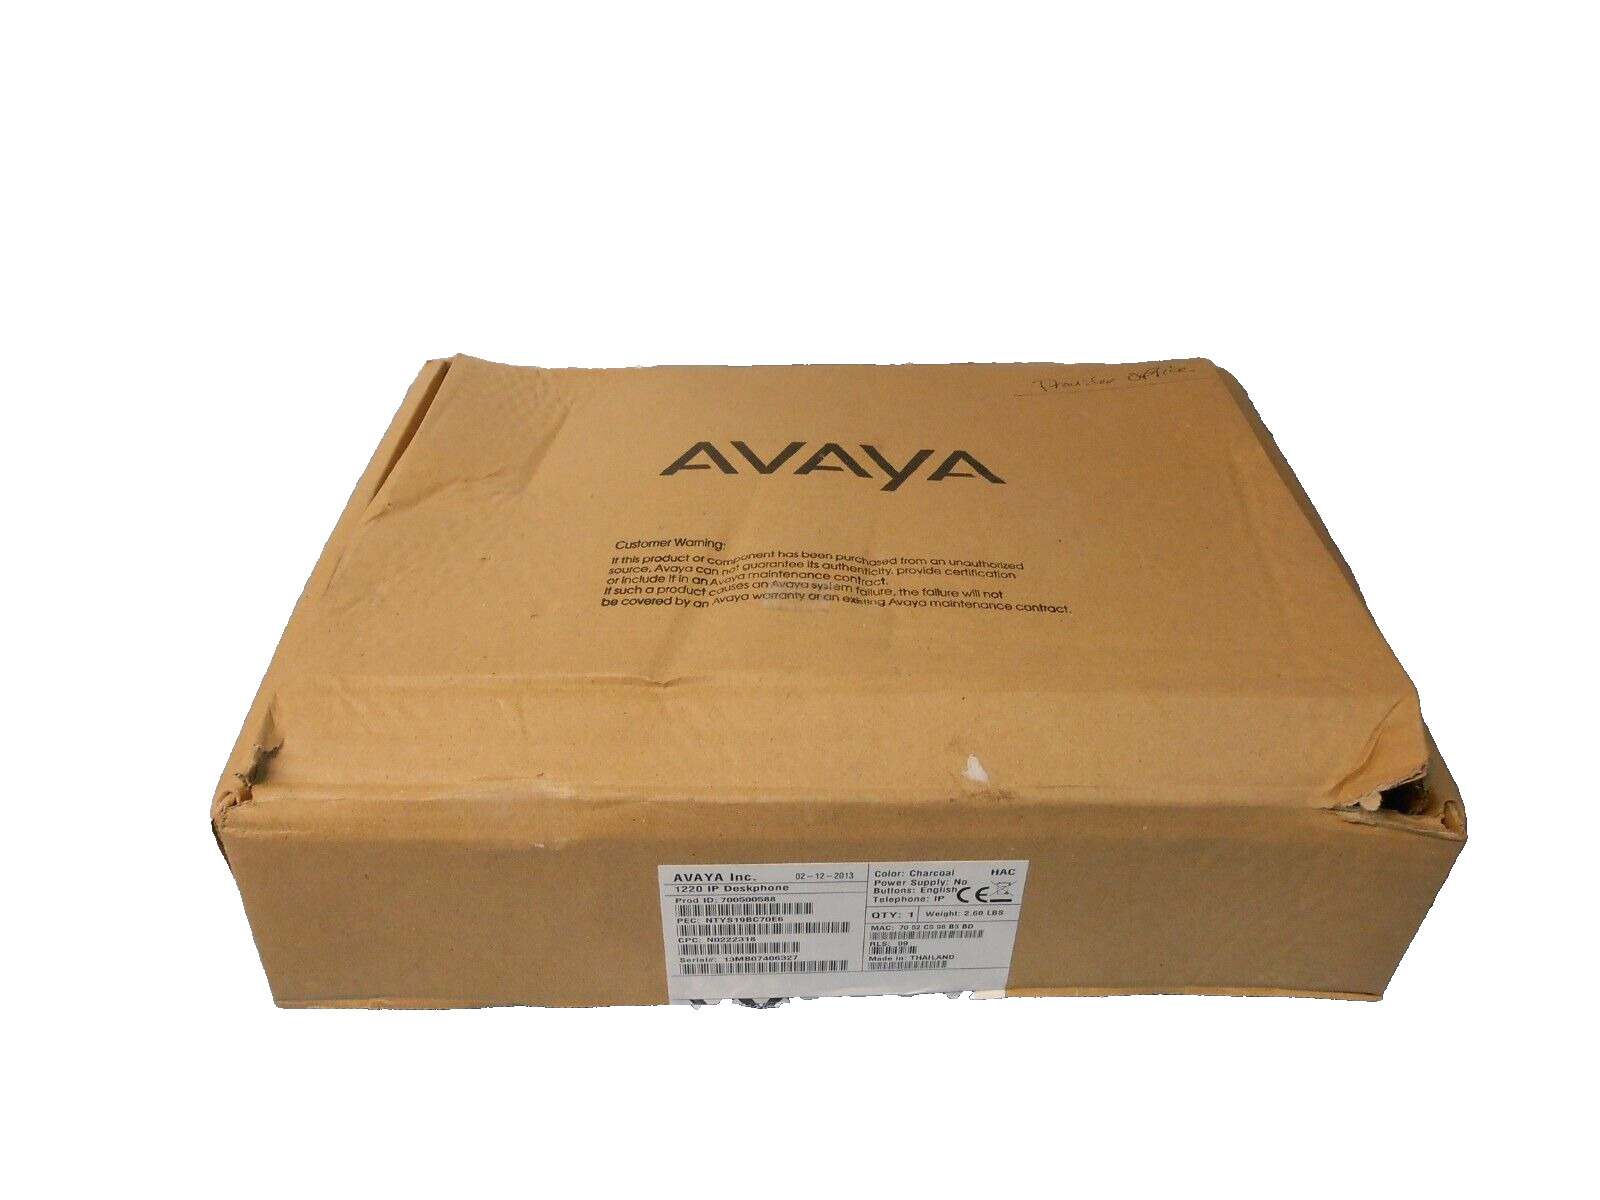 Avaya 1220 700500588 (NTYS19) 4 Button Self-Labeling VoIP Telephone